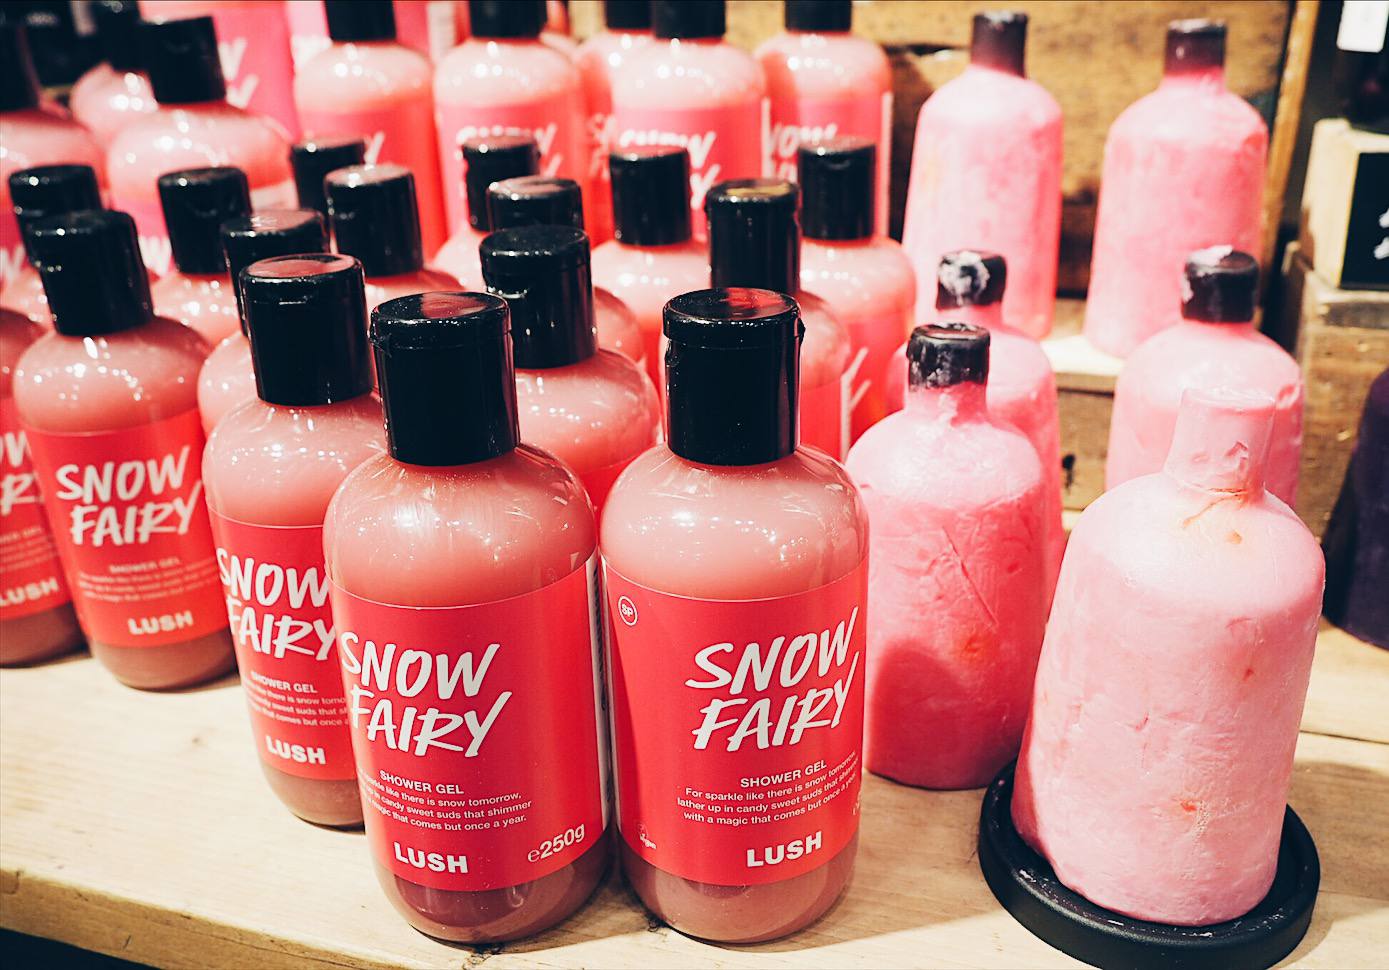 Snow Fairy products